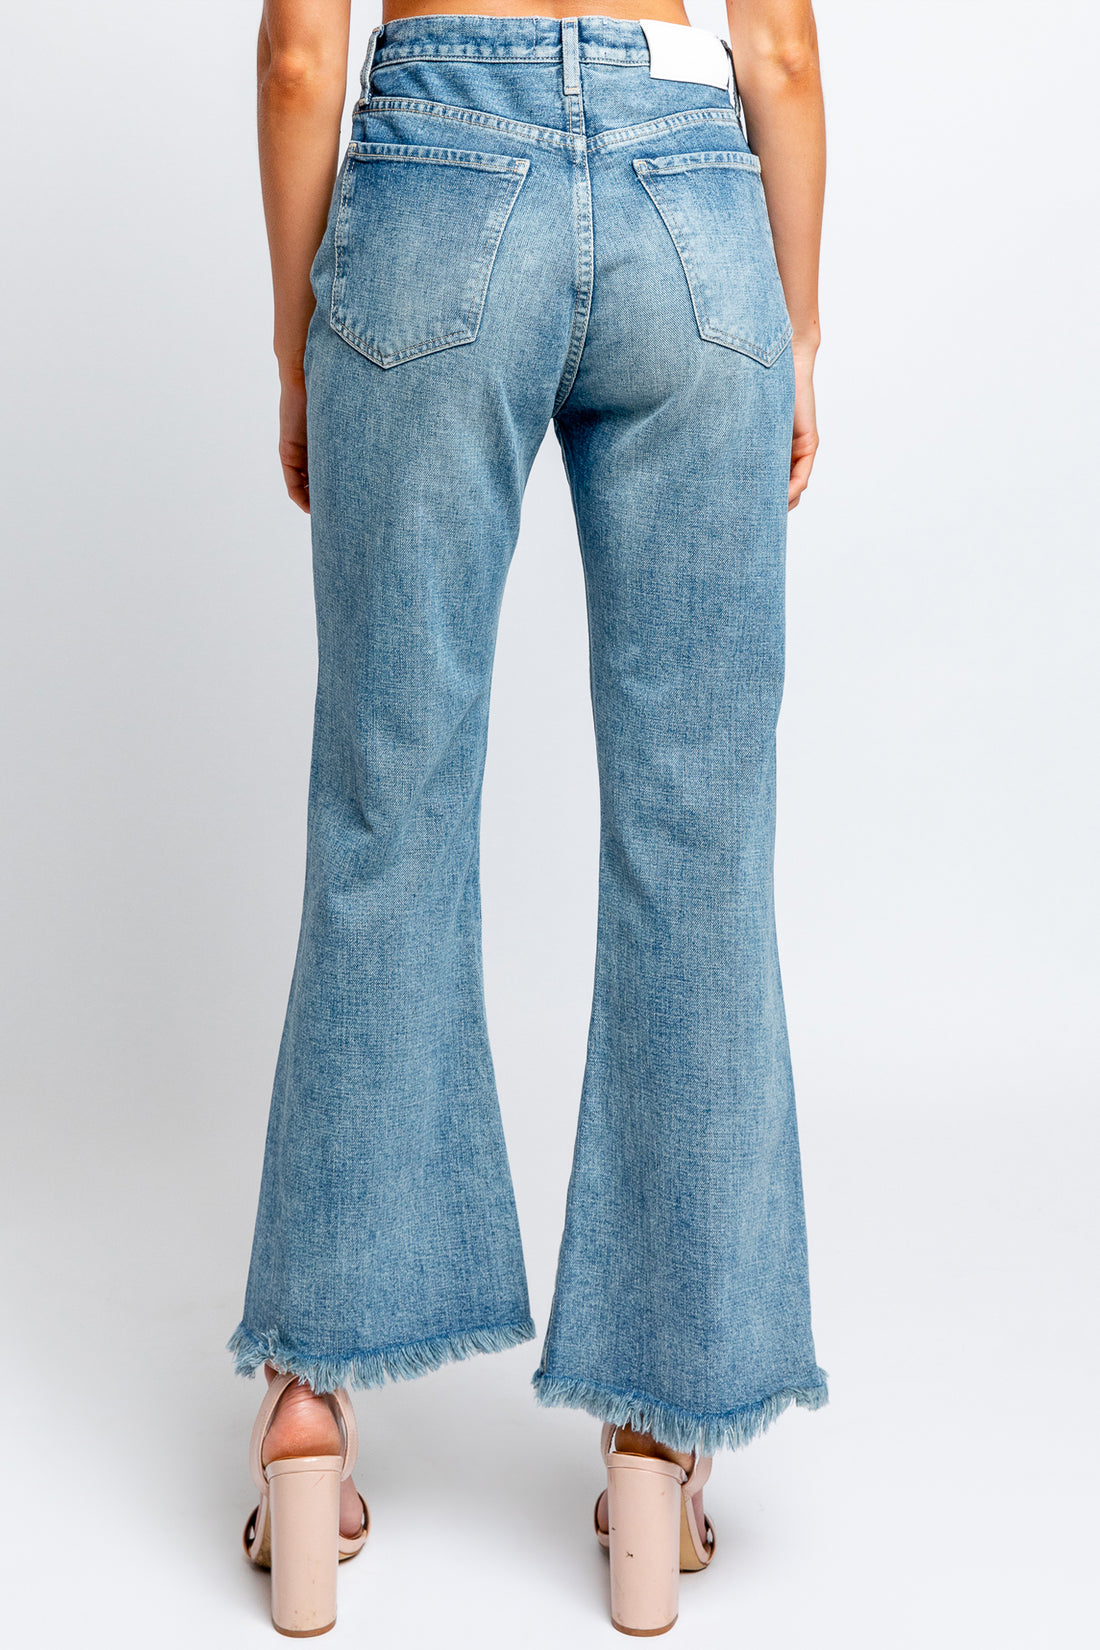 7 For All Mankind Easy Boy Bootcut in Teaparty